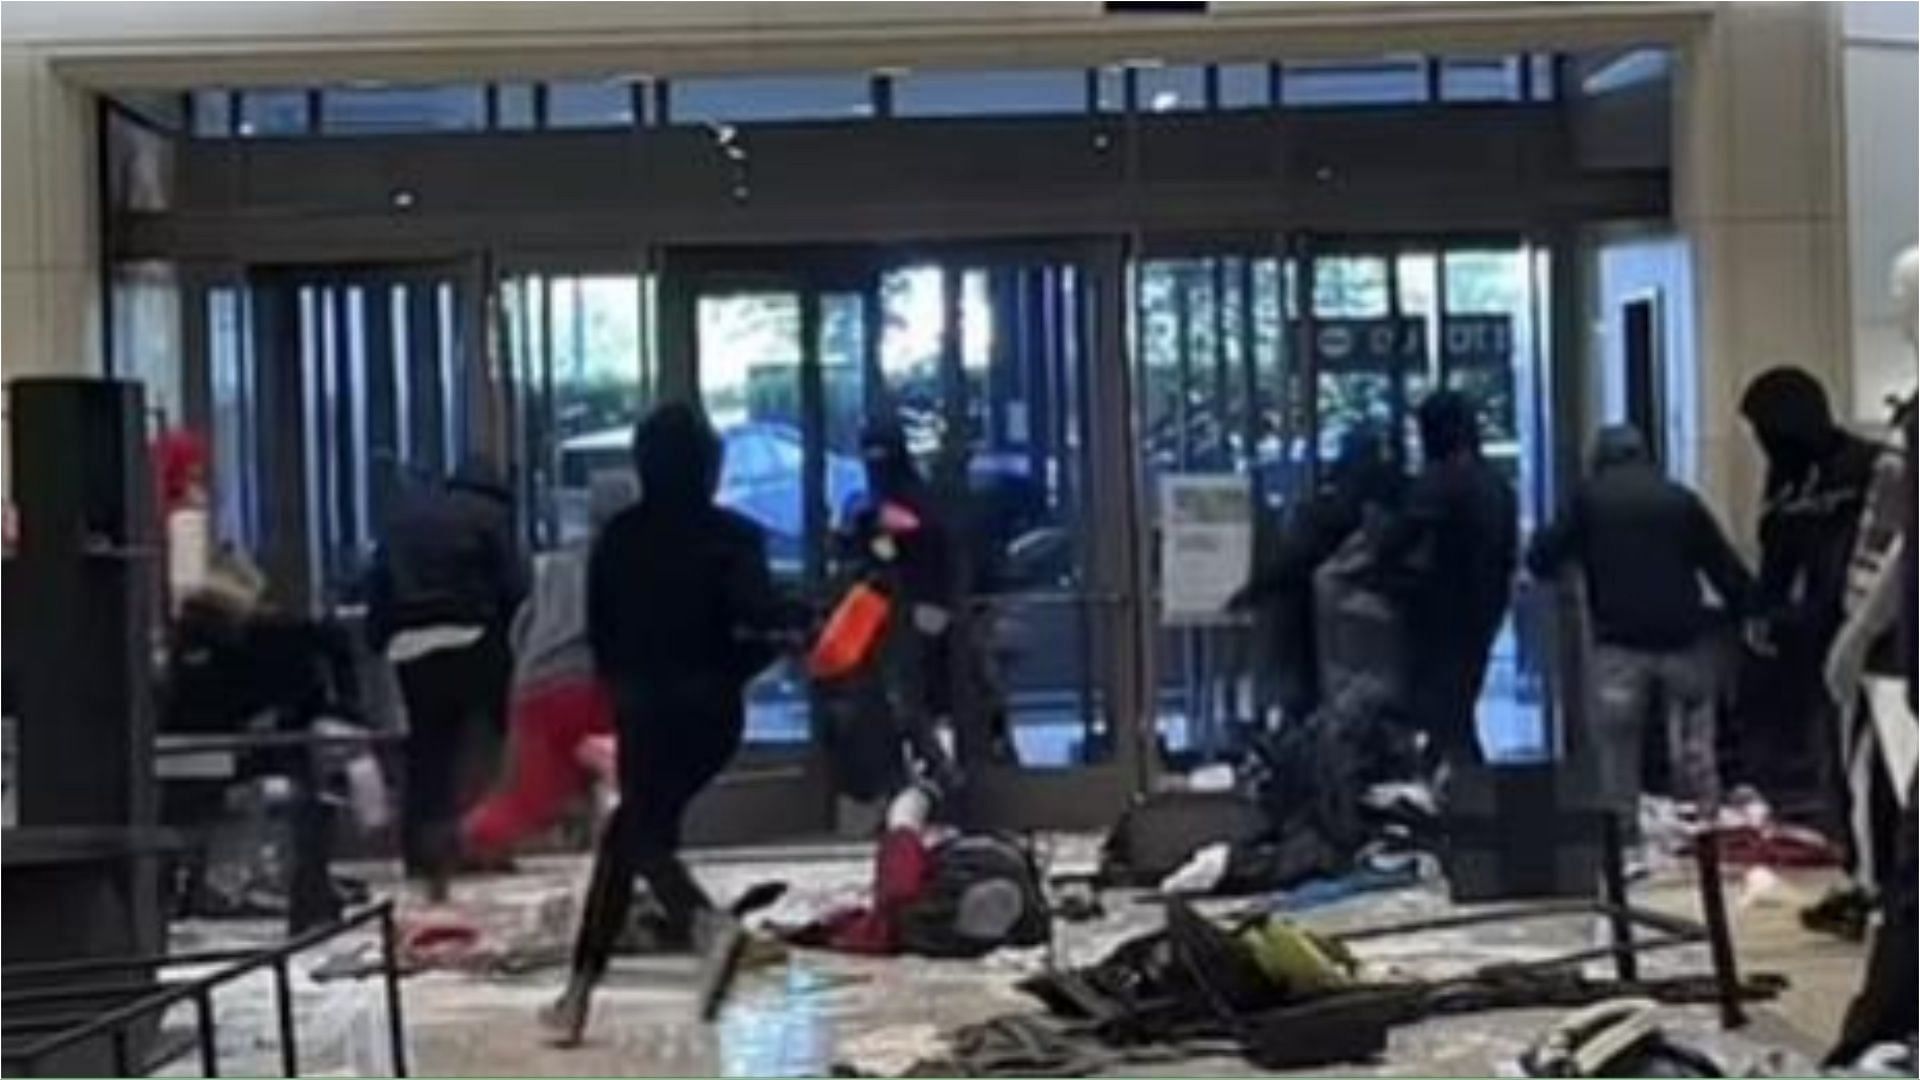 Gotham with no Batman: Topanga Mall Nordstrom looting video goes viral,  sparks outrage online